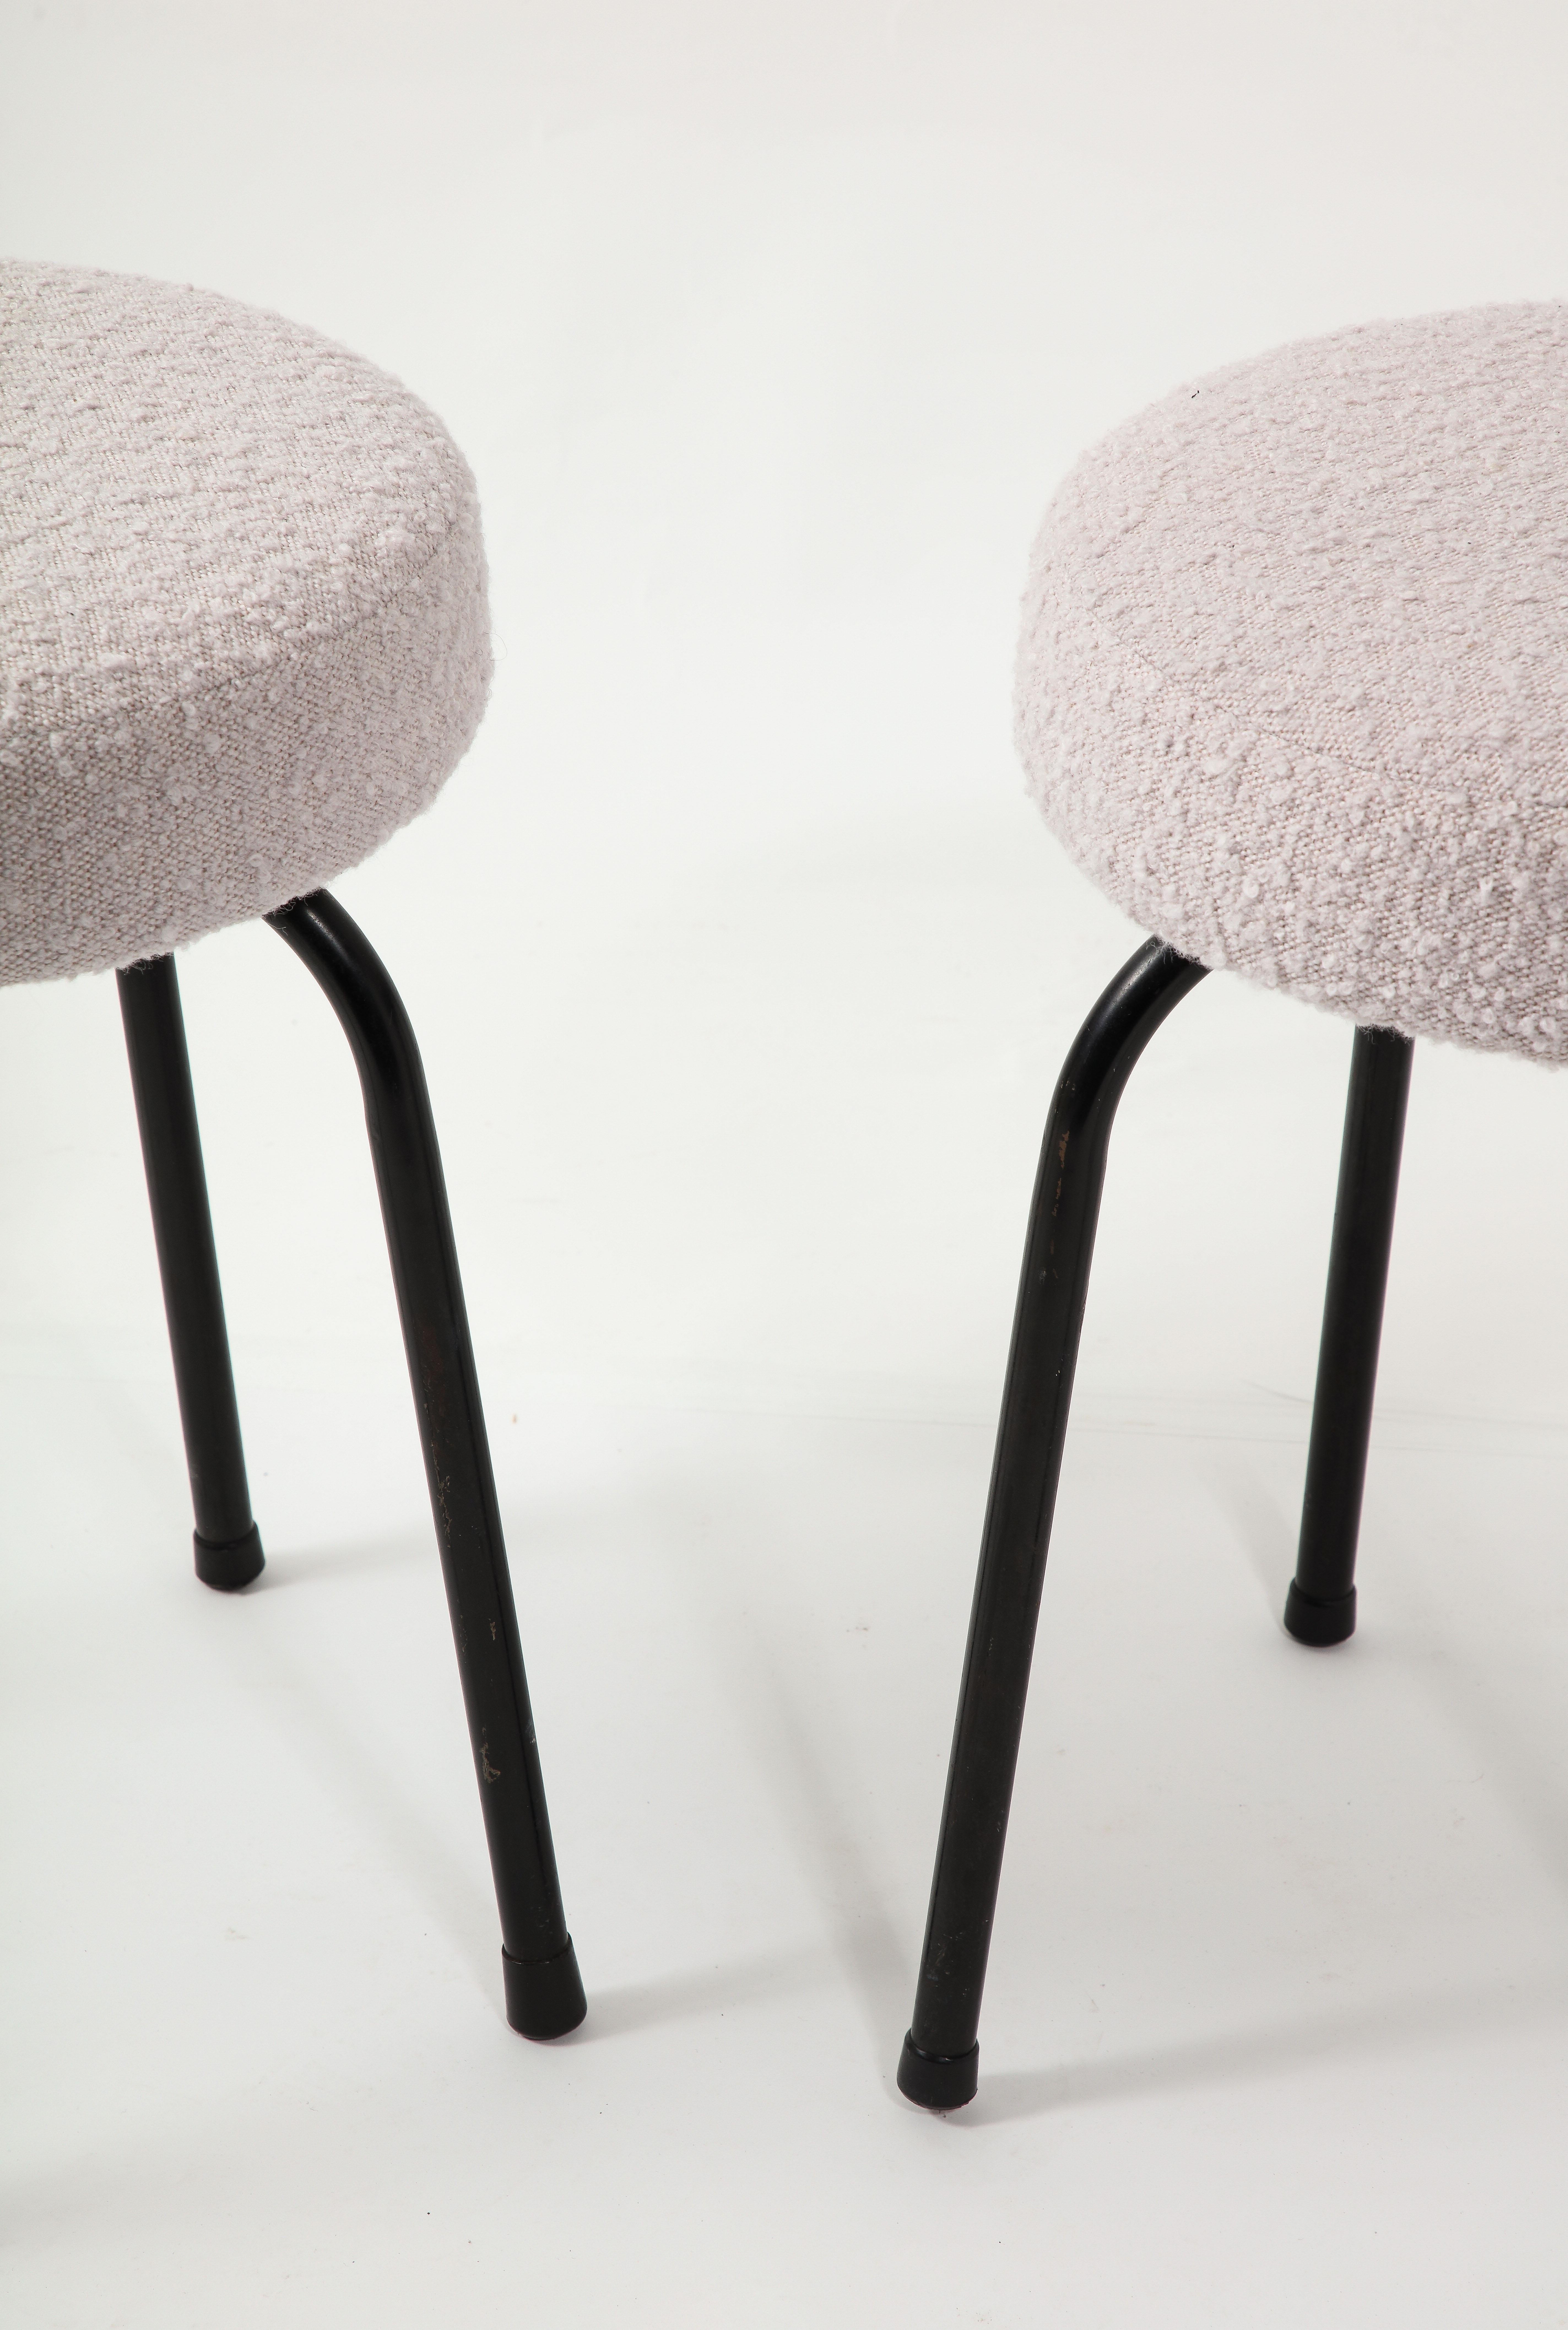 Pair of Boucle & Black Steel Stools, France 1950's In Good Condition For Sale In New York, NY